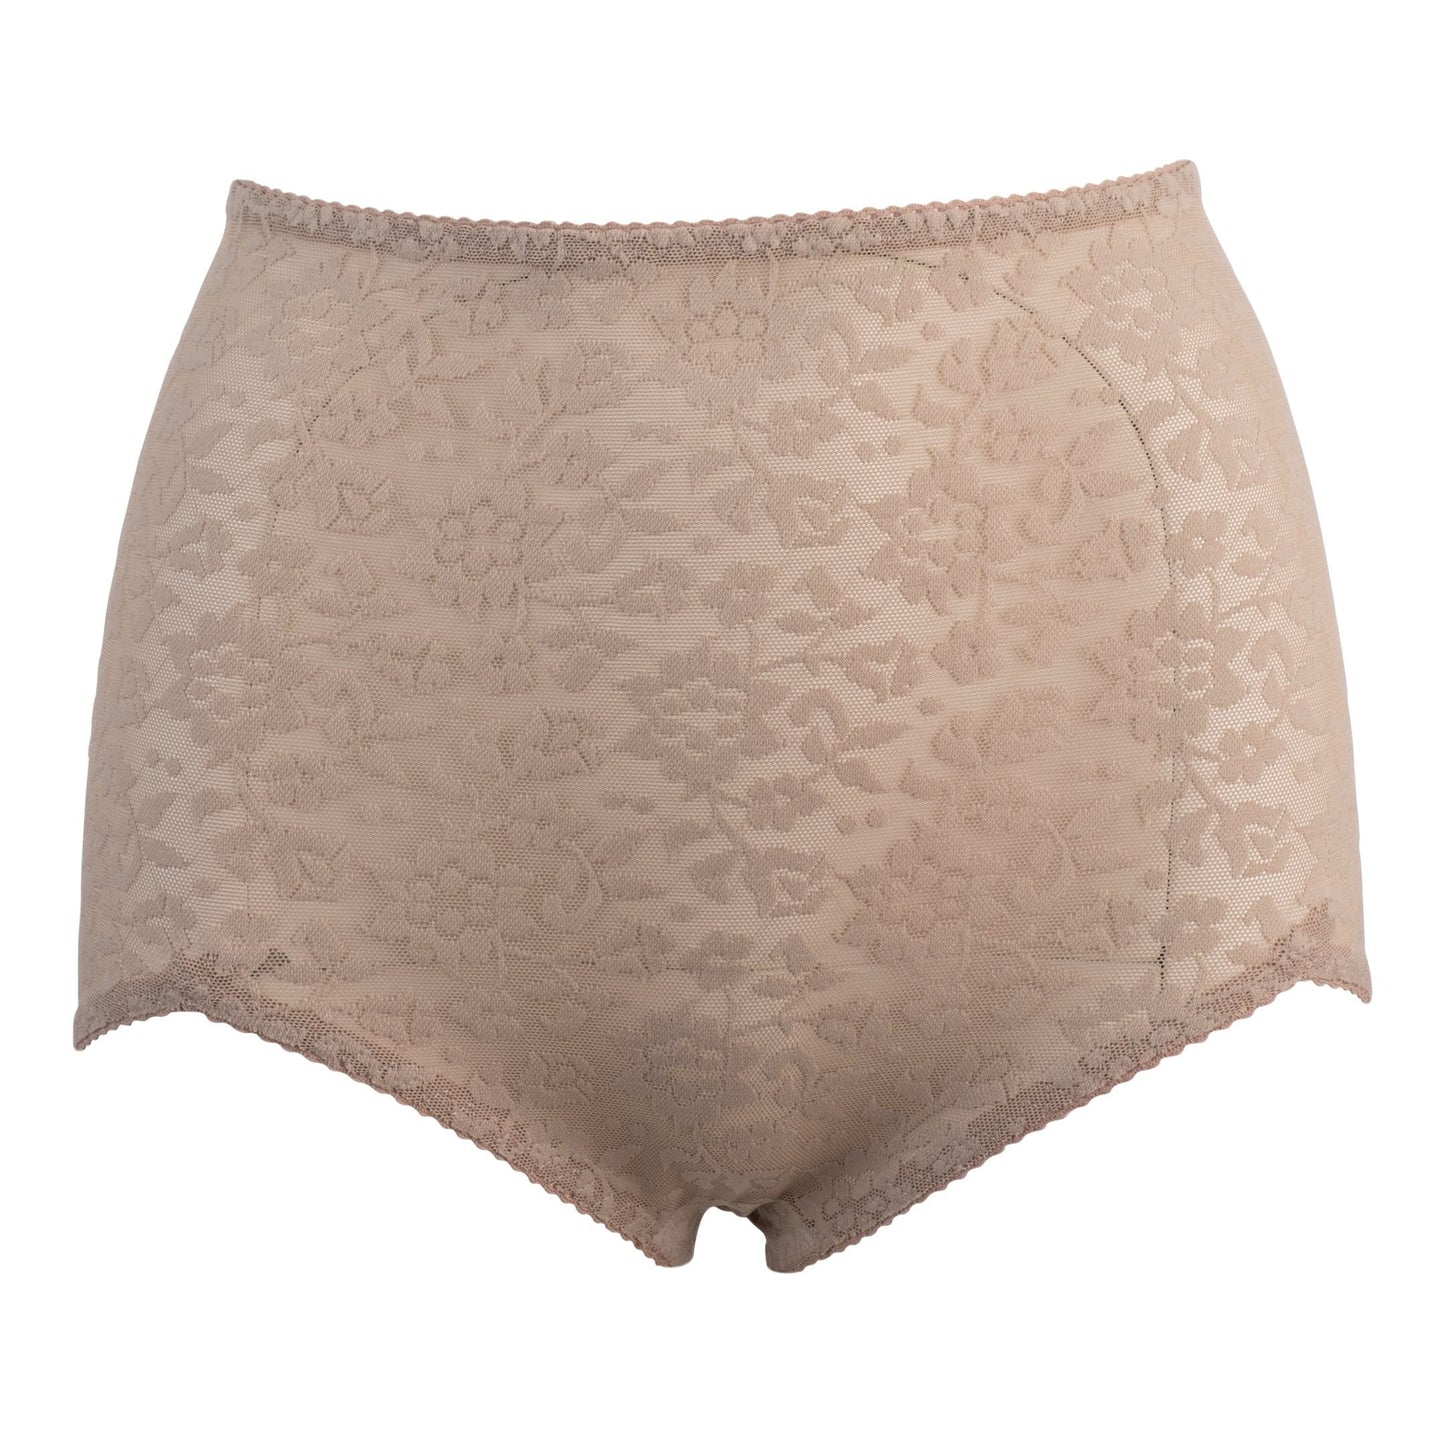 Style 41 | "V" Leg Panty Brief Extra Firm Shaping